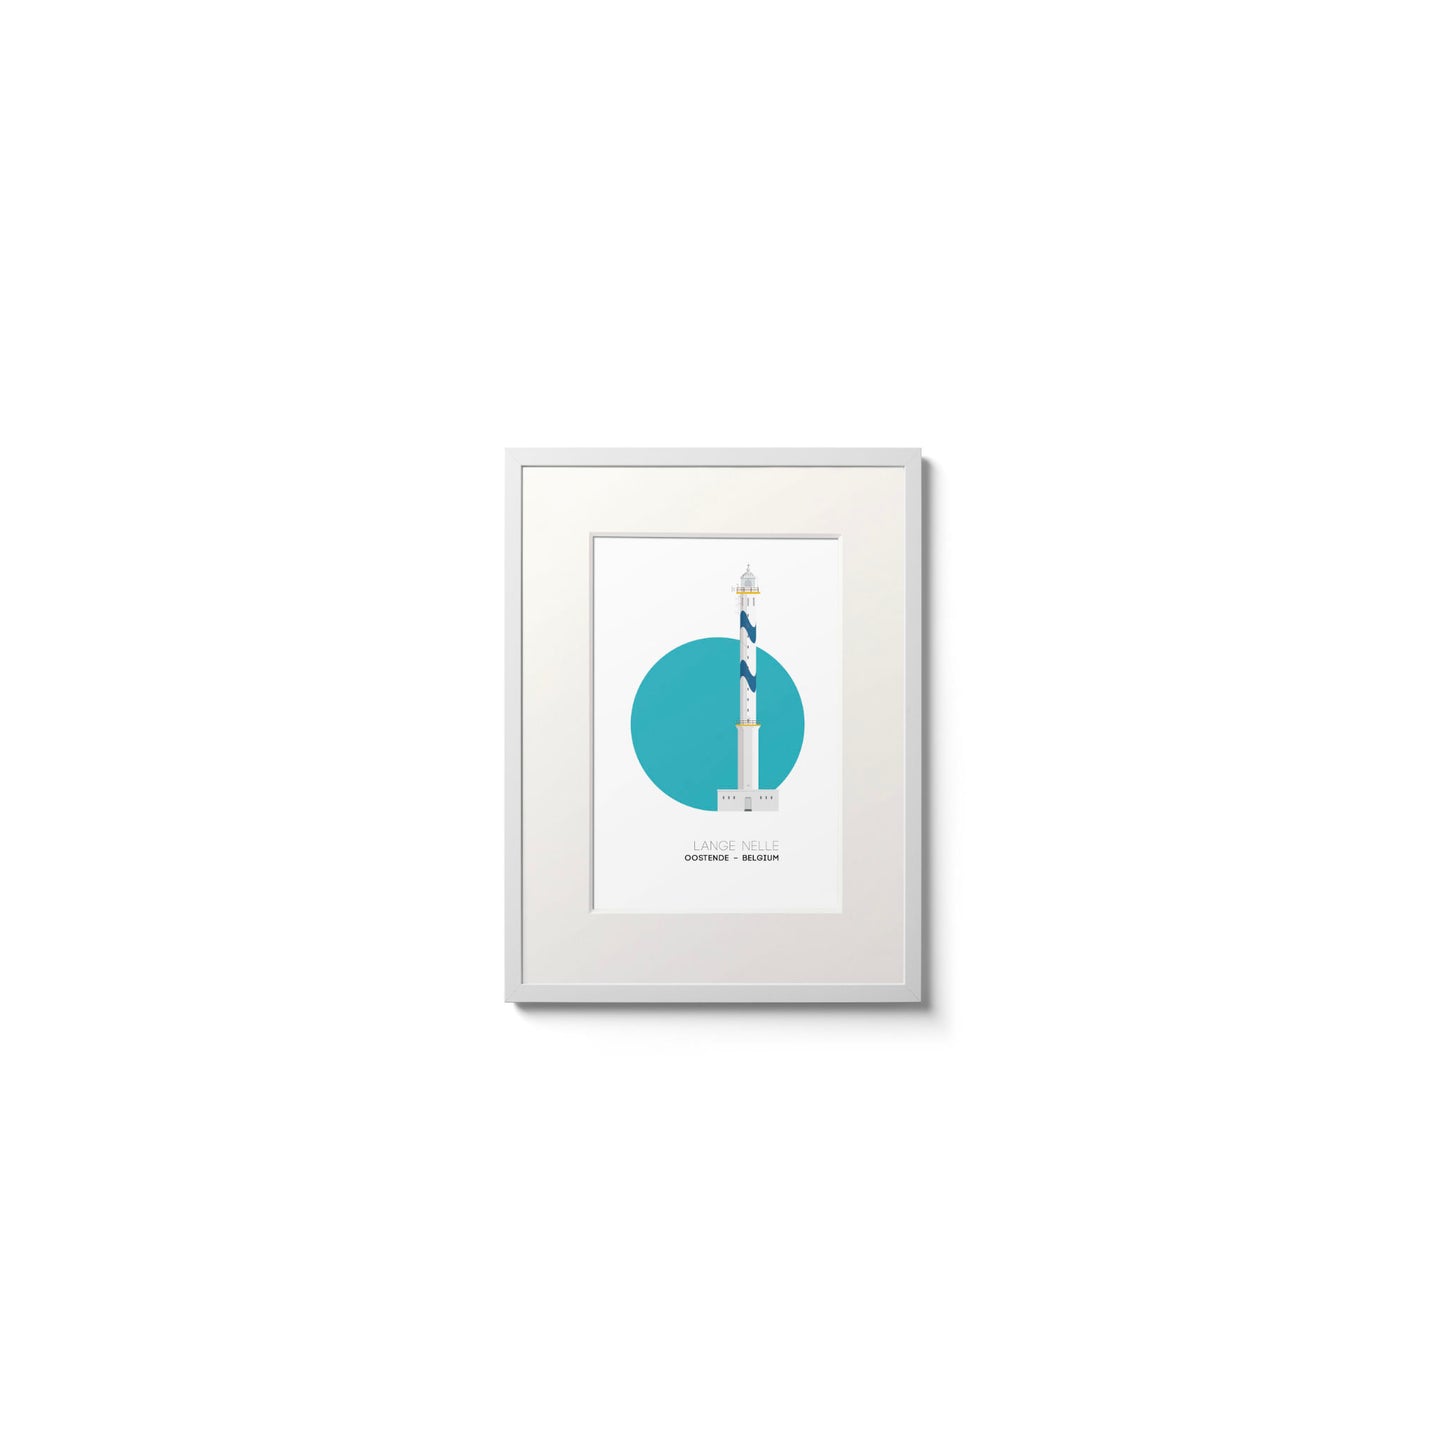 Illustration of the Lange Nelle lighthouse in Oostend, Belgium, with blue waves pattern painted onto it. On a white background with aqua blue circle as a backdrop, framed and measuring 15x20cm.